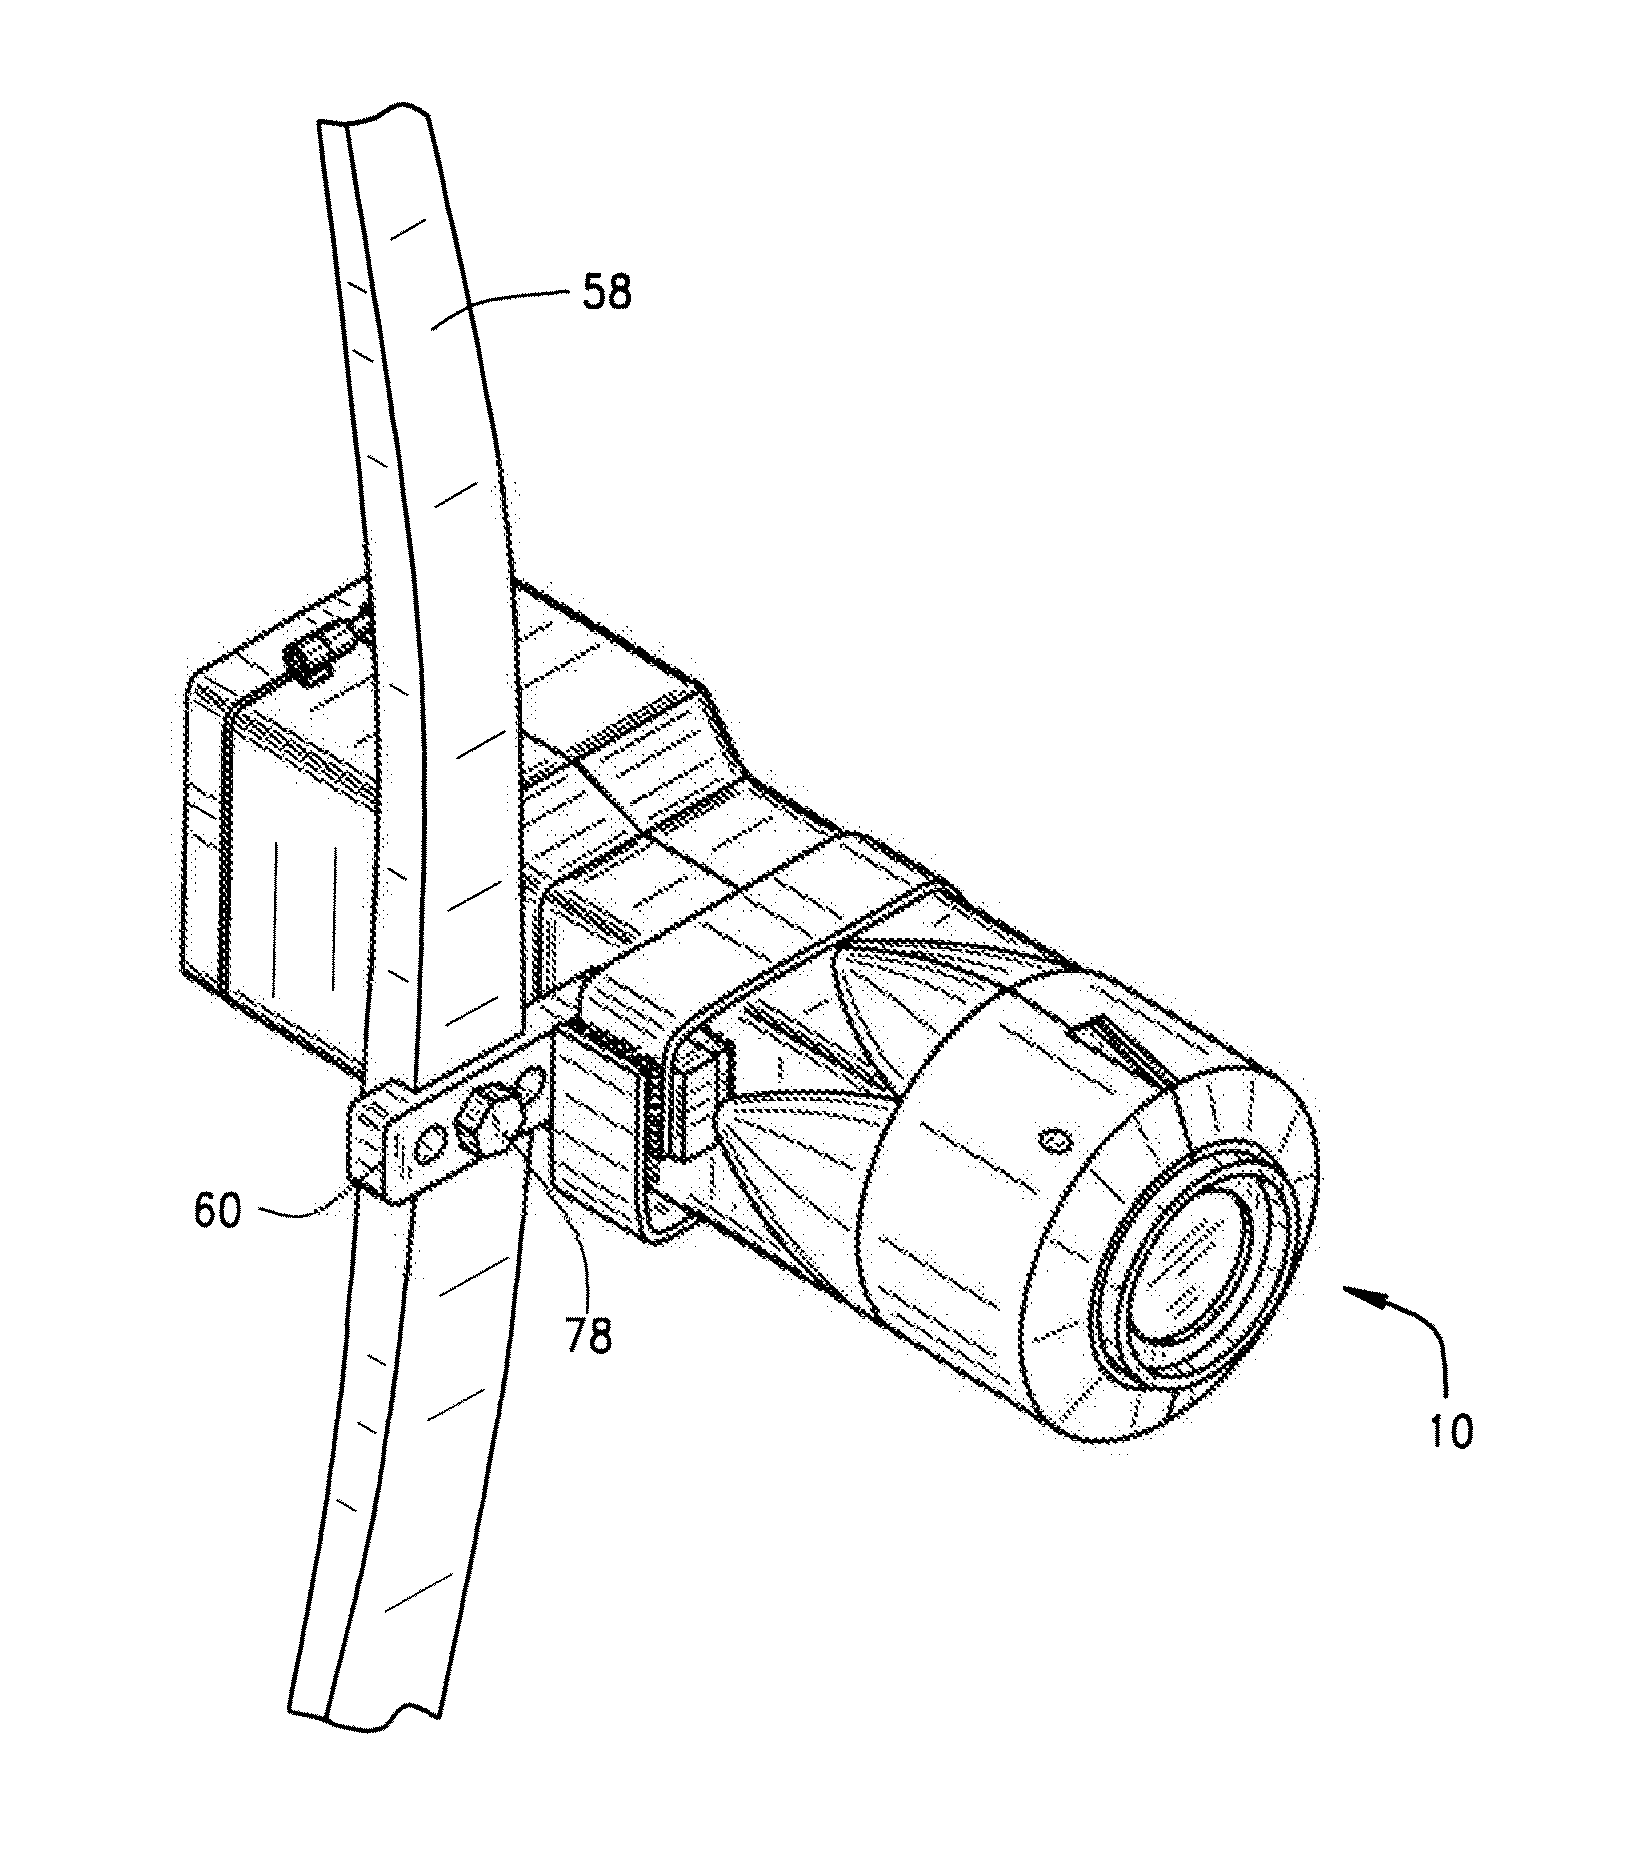 Vibration resistant camera for mounting to object